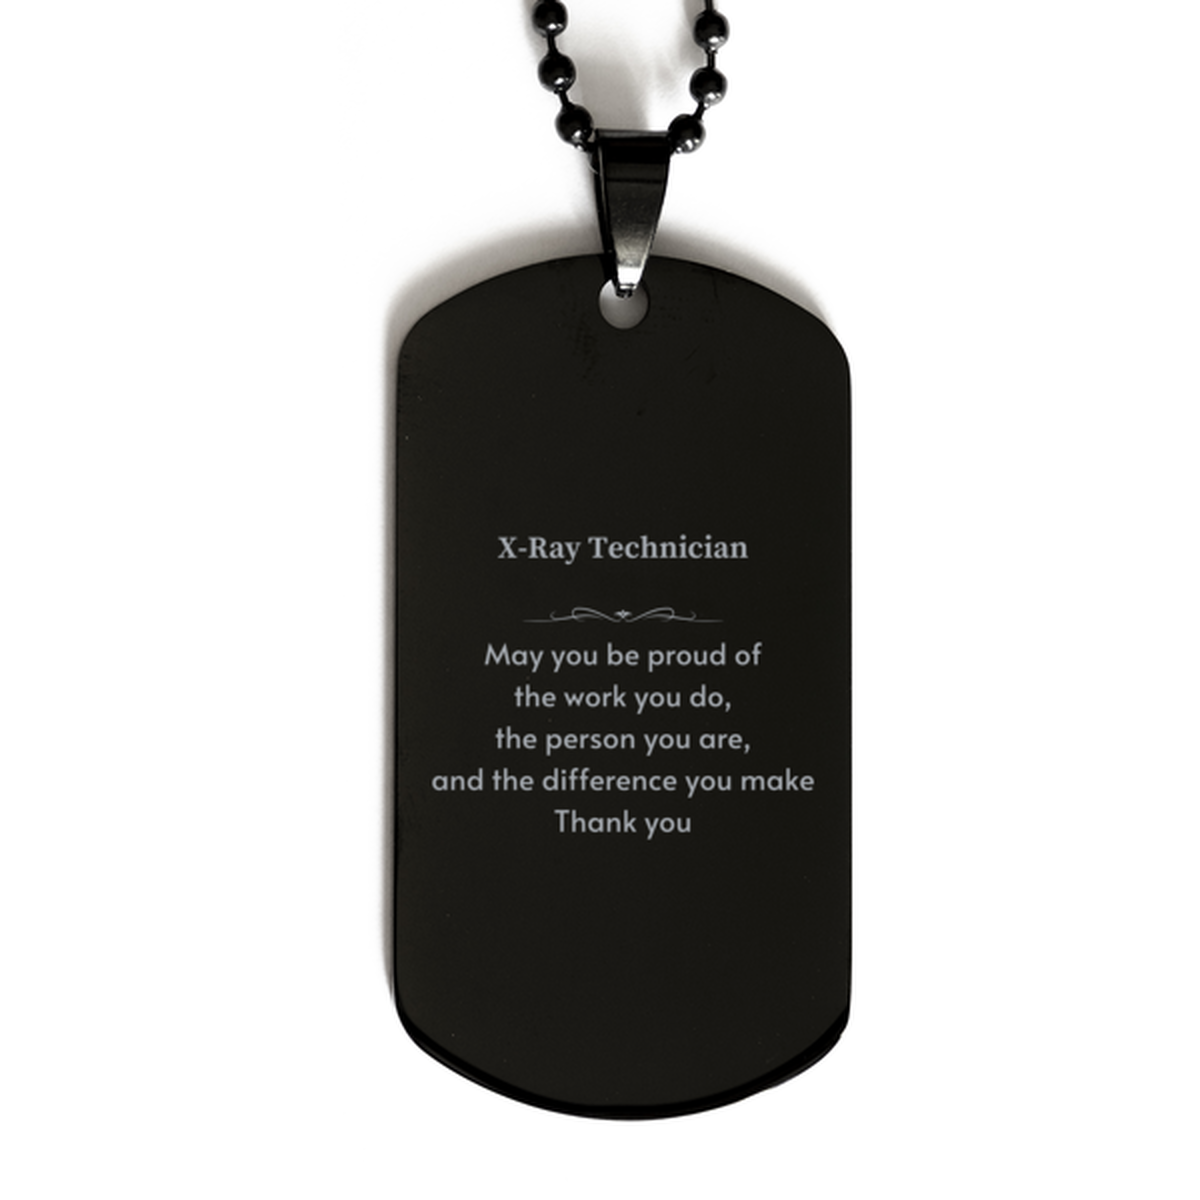 Heartwarming Black Dog Tag Retirement Coworkers Gifts for X-Ray Technician, X-Ray Technician May You be proud of the work you do, the person you are Gifts for Boss Men Women Friends